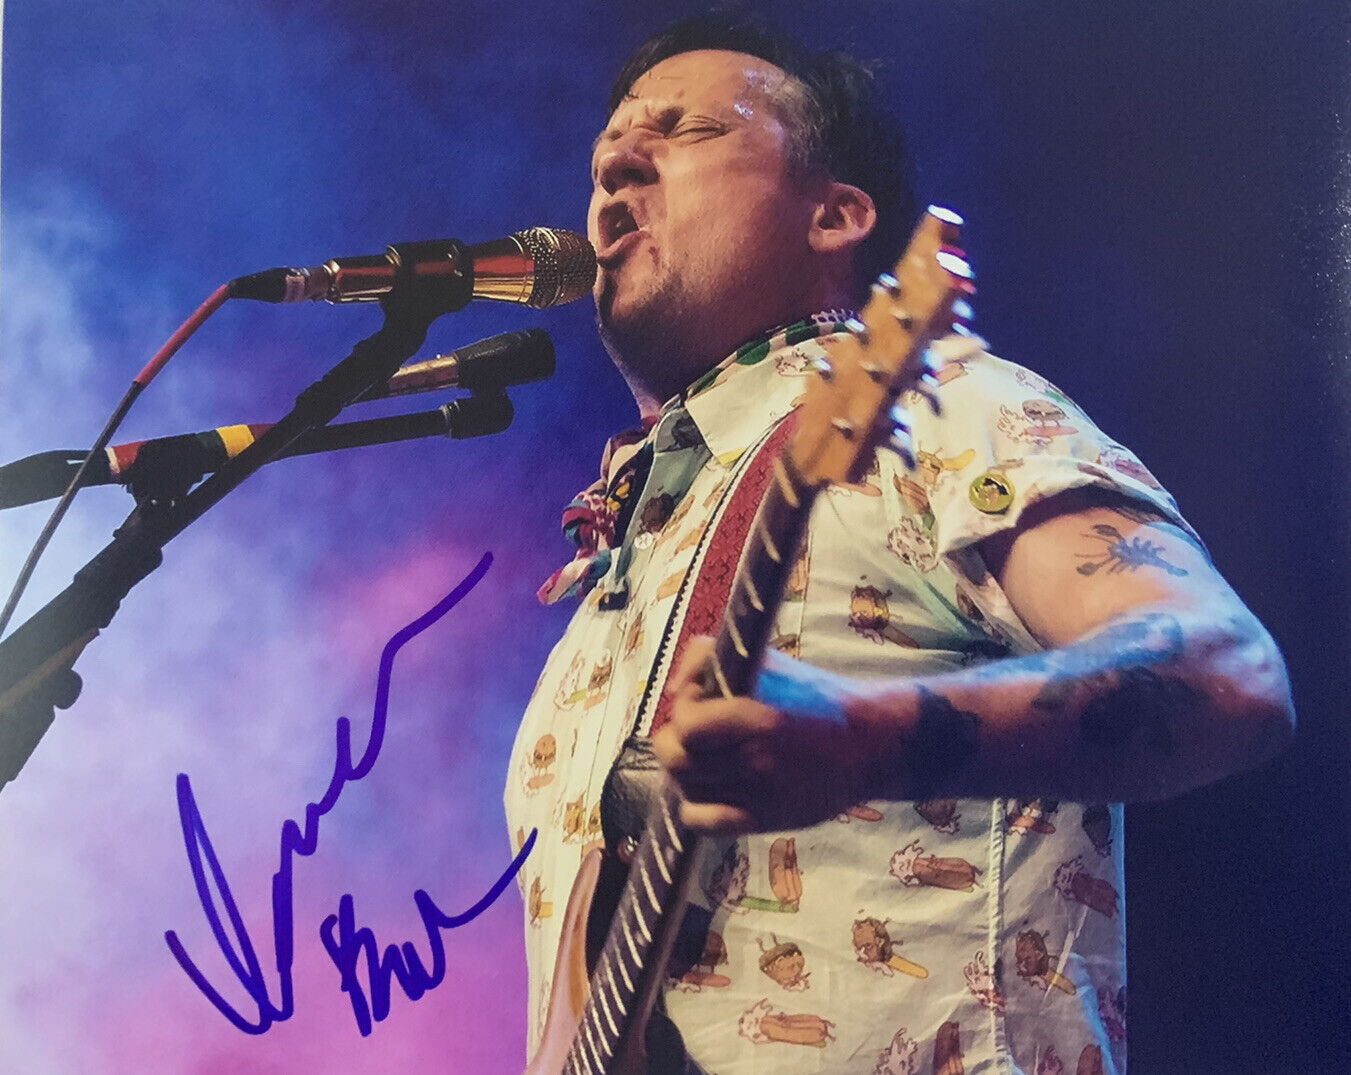 ISAAC BROCK HAND SIGNED 8x10 Photo Poster painting MODEST MOUSE SINGER AUTOGRAPH AUTHENTIC COA